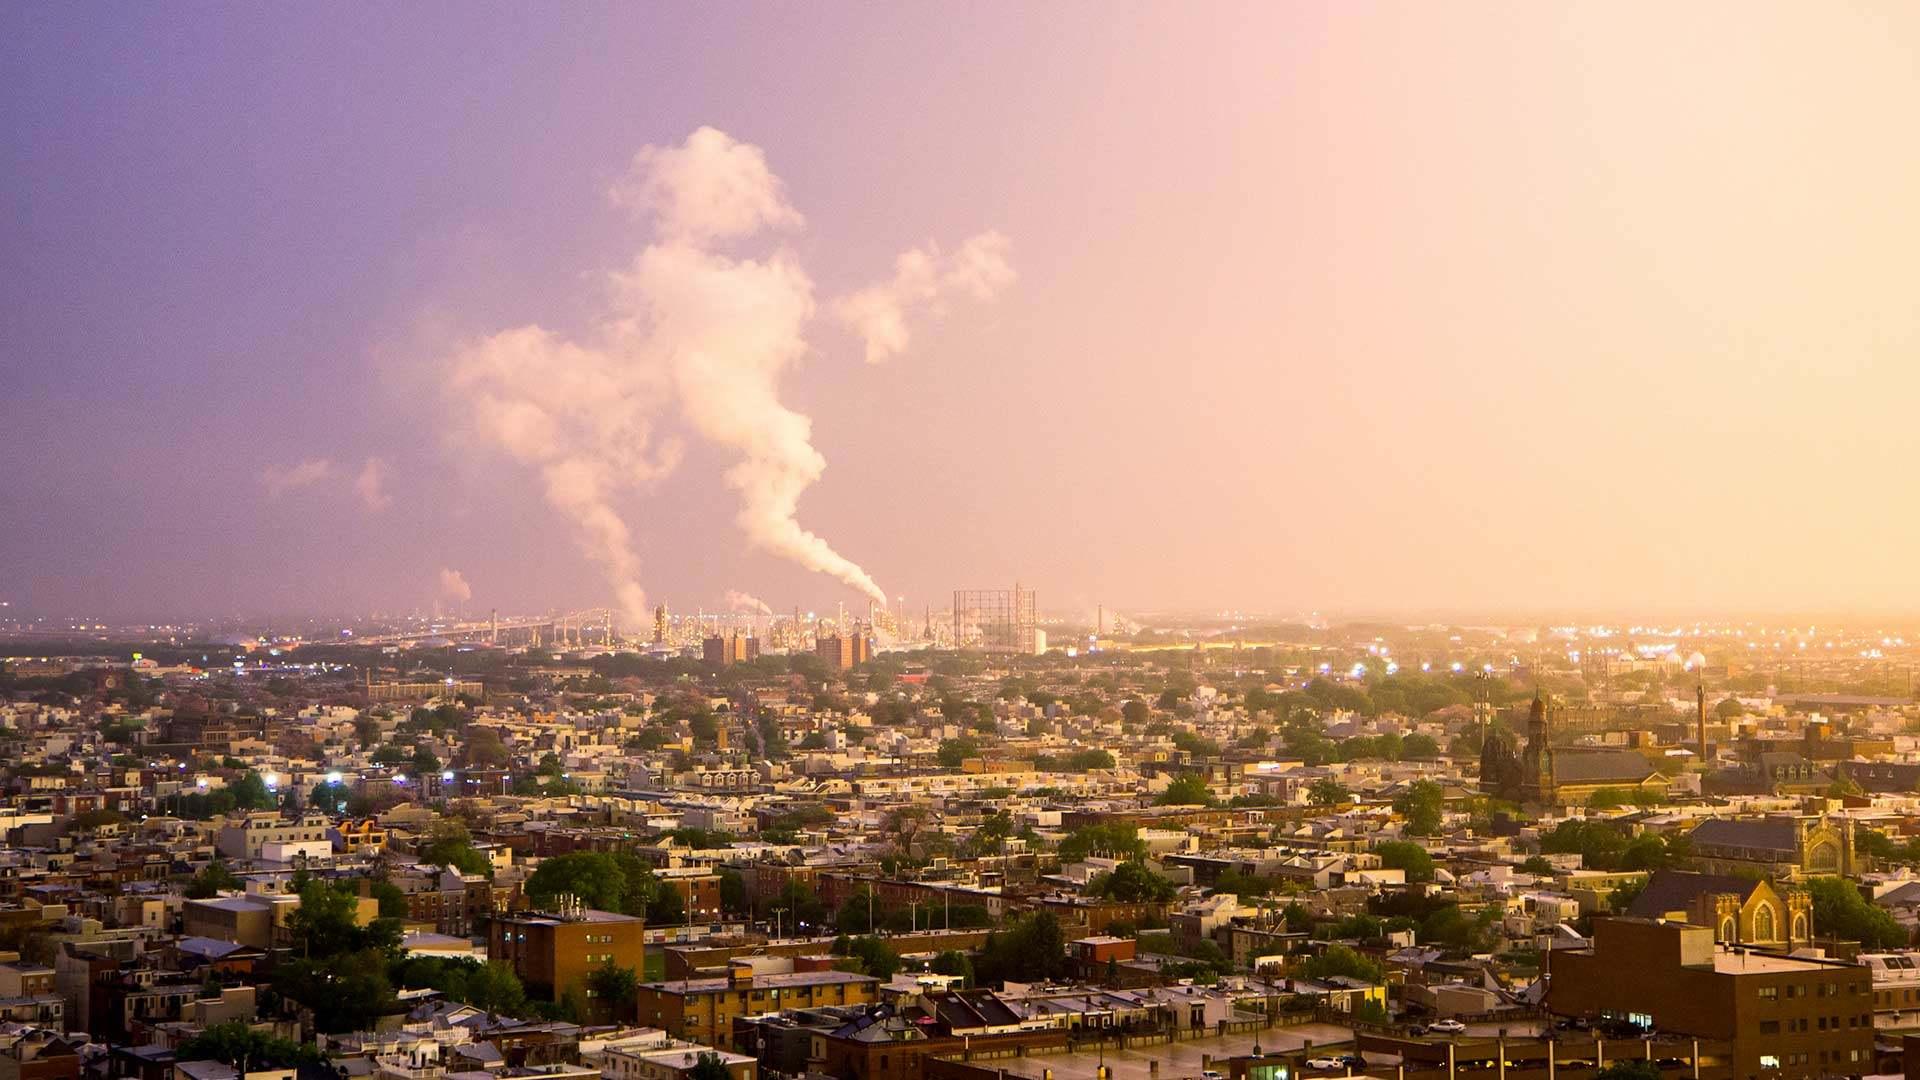 Oil refineries in South Philly send smokestacks skyward after a summer storm